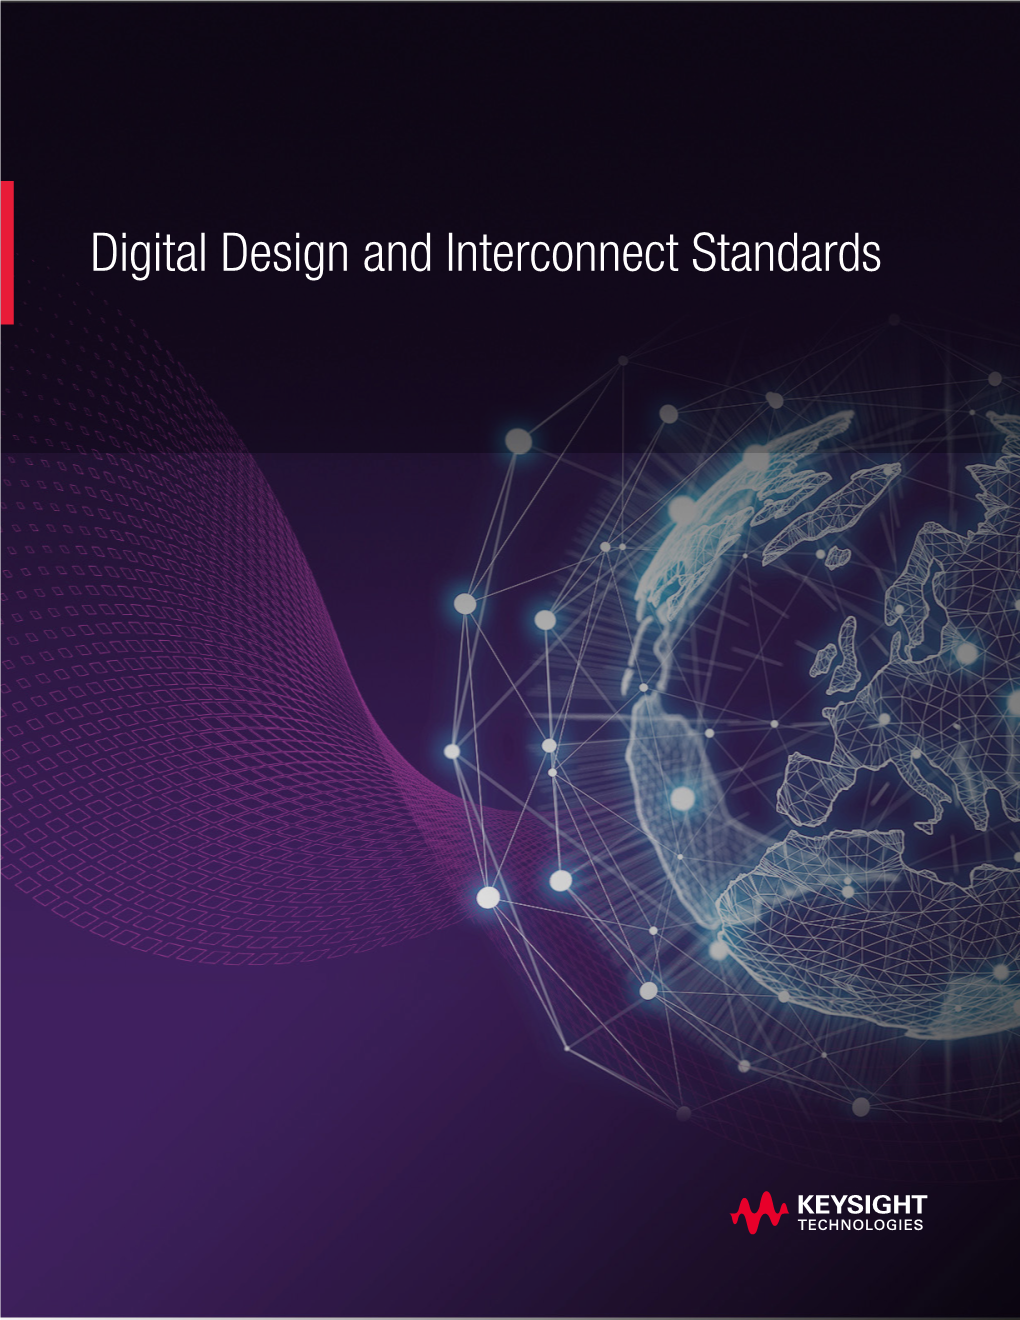 Digital Design and Interconnect Standards Overcome Challenges Across the Design Cycle